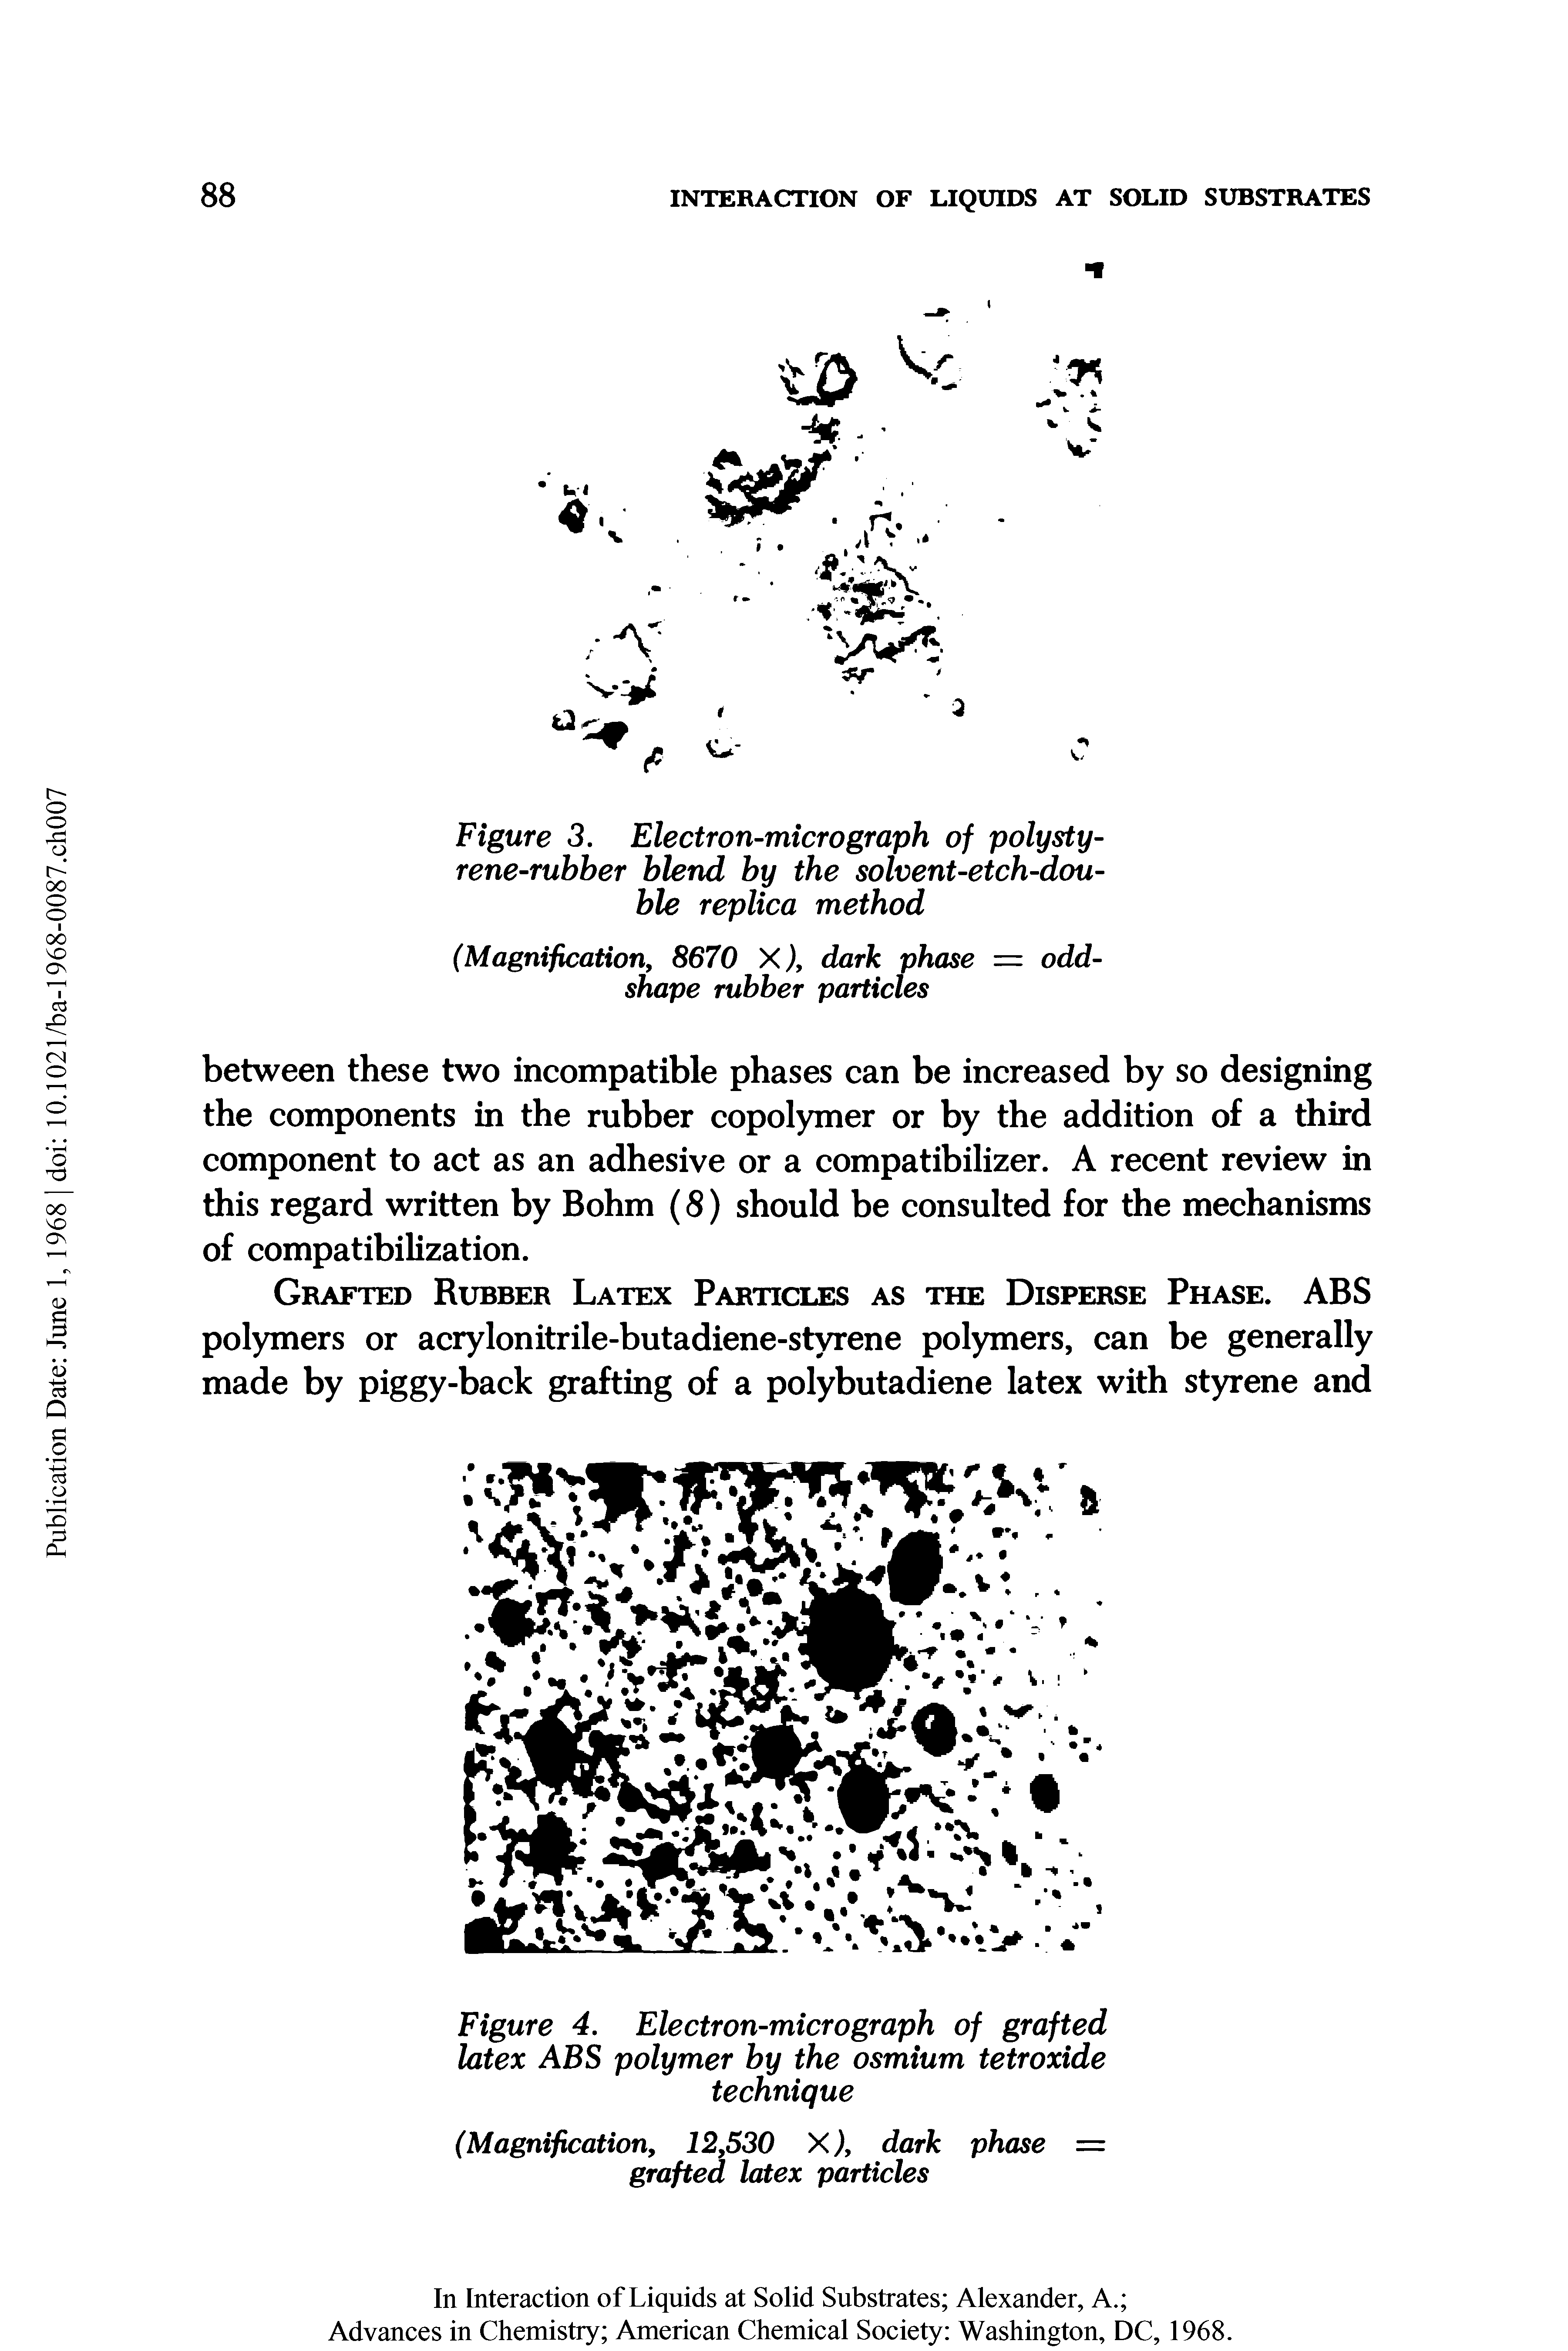 Figure 4. Electron-micrograph of grafted latex ABS polymer by the osmium tetroxide technique...